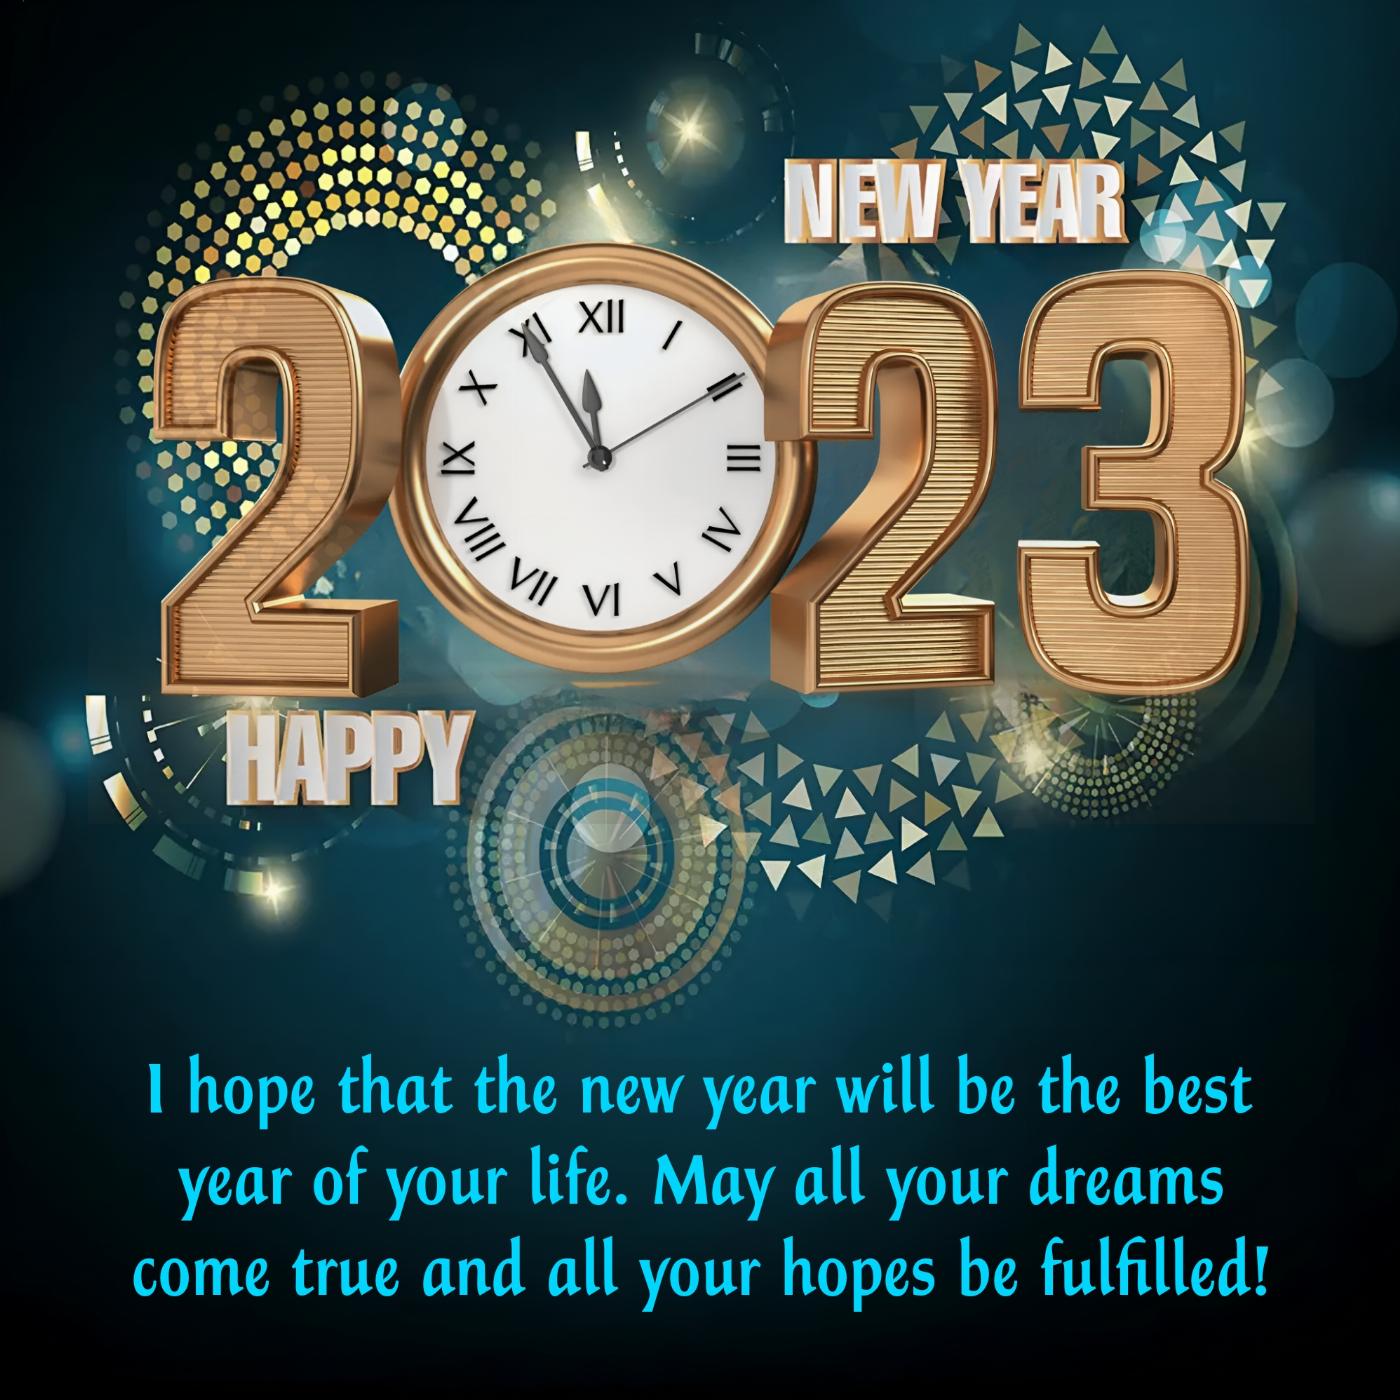 I hope that the new year will be the best year of your life